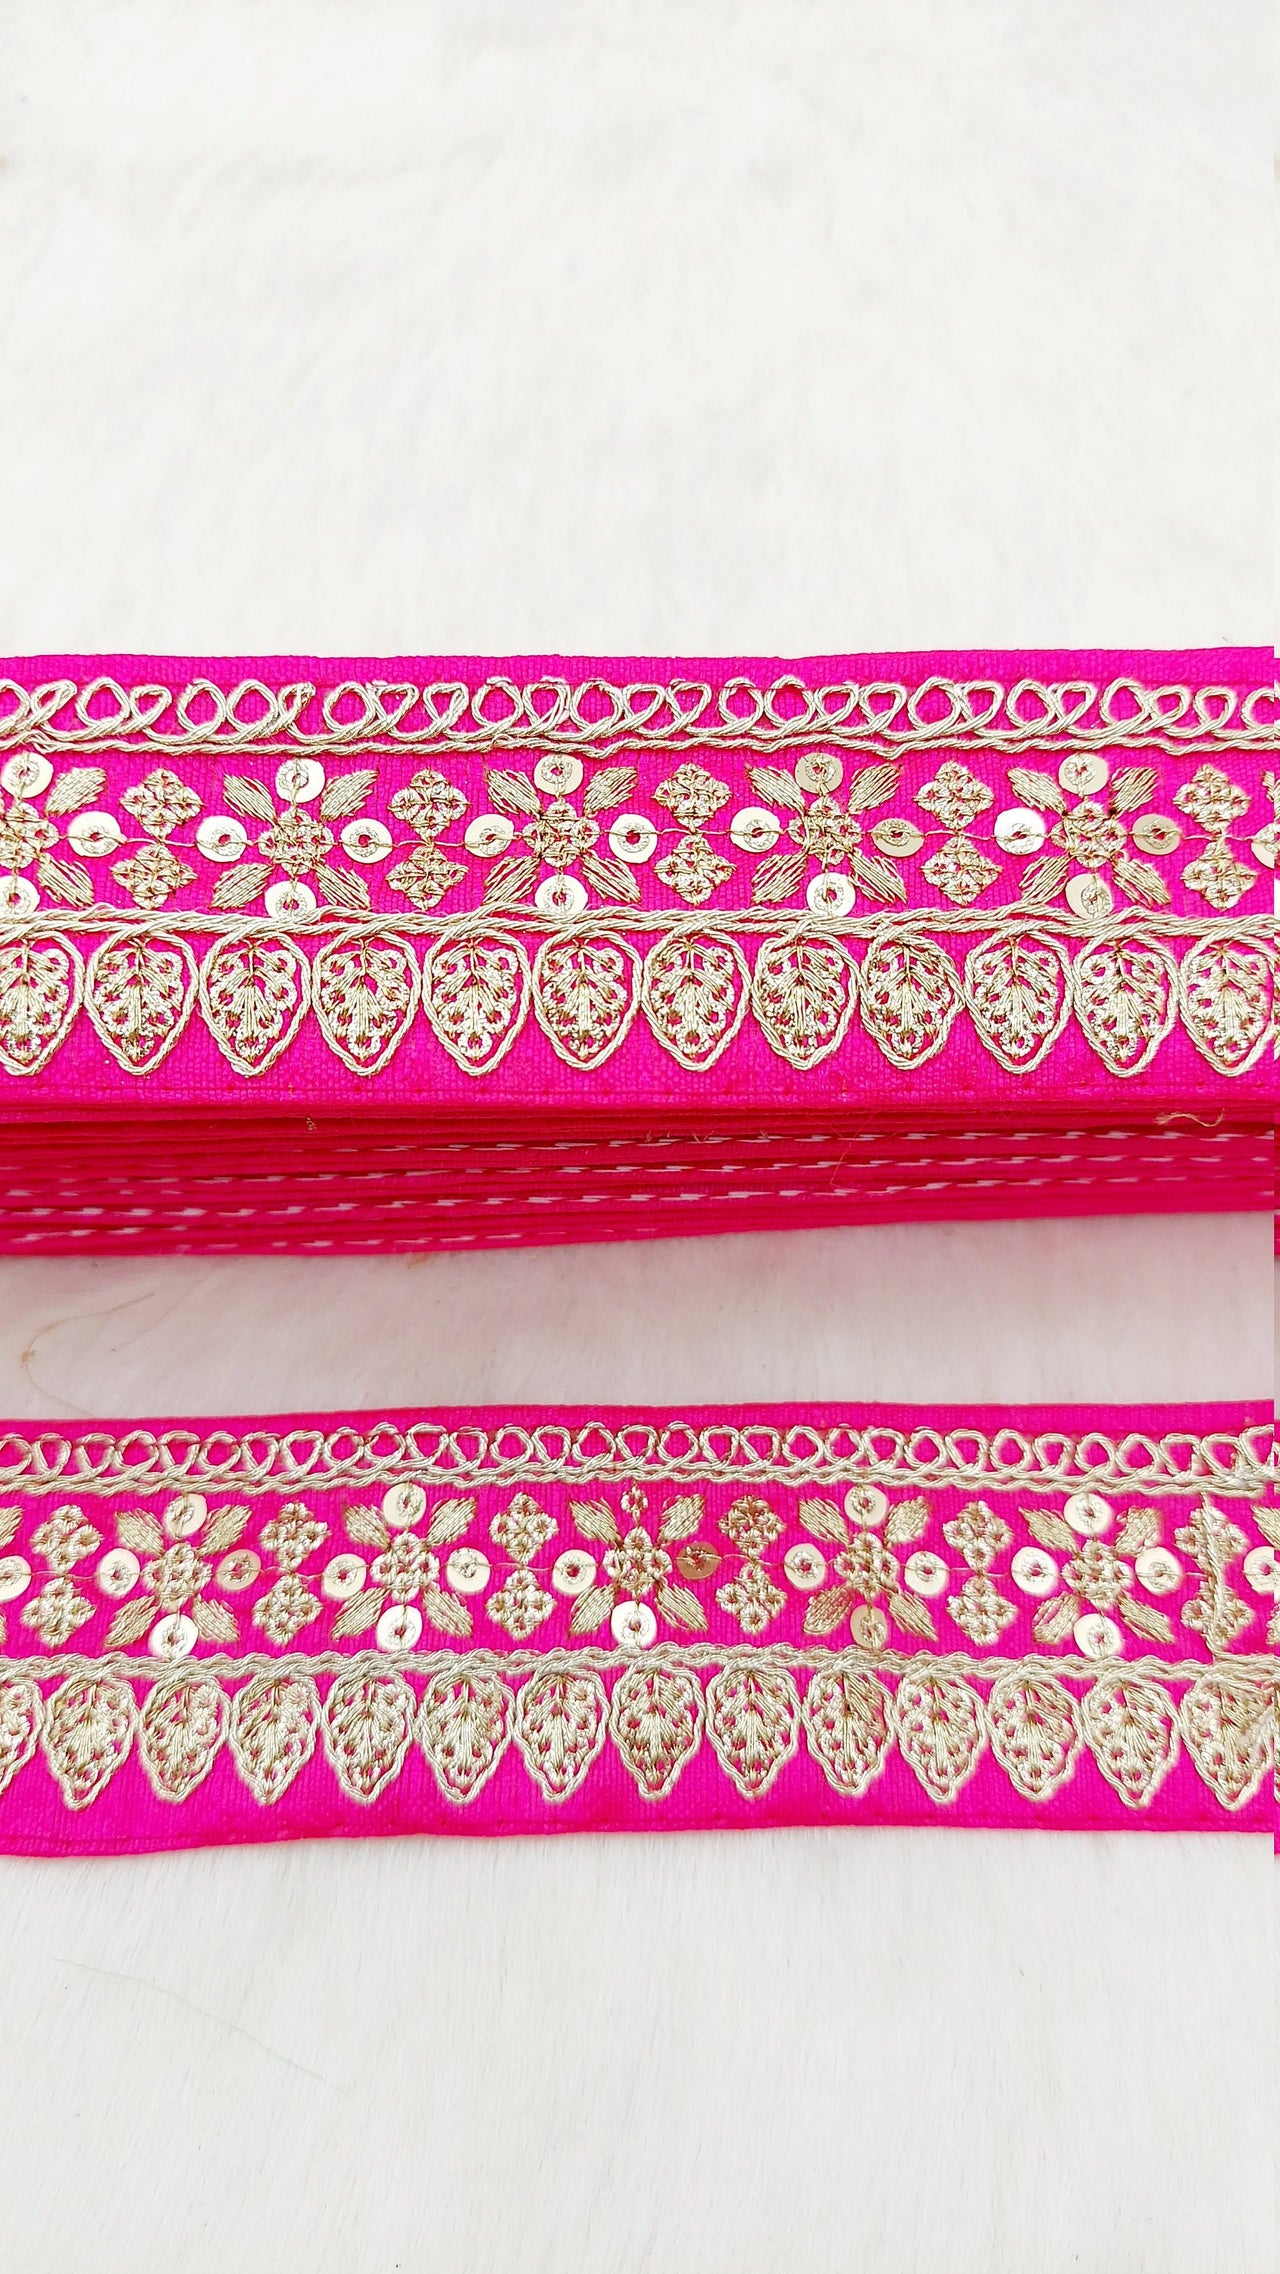 Fuchsia Pink Art Silk Fabric Trim With Gold Floral Embroidery, Floral Sequins Sari Border, Trim By 9 Yards